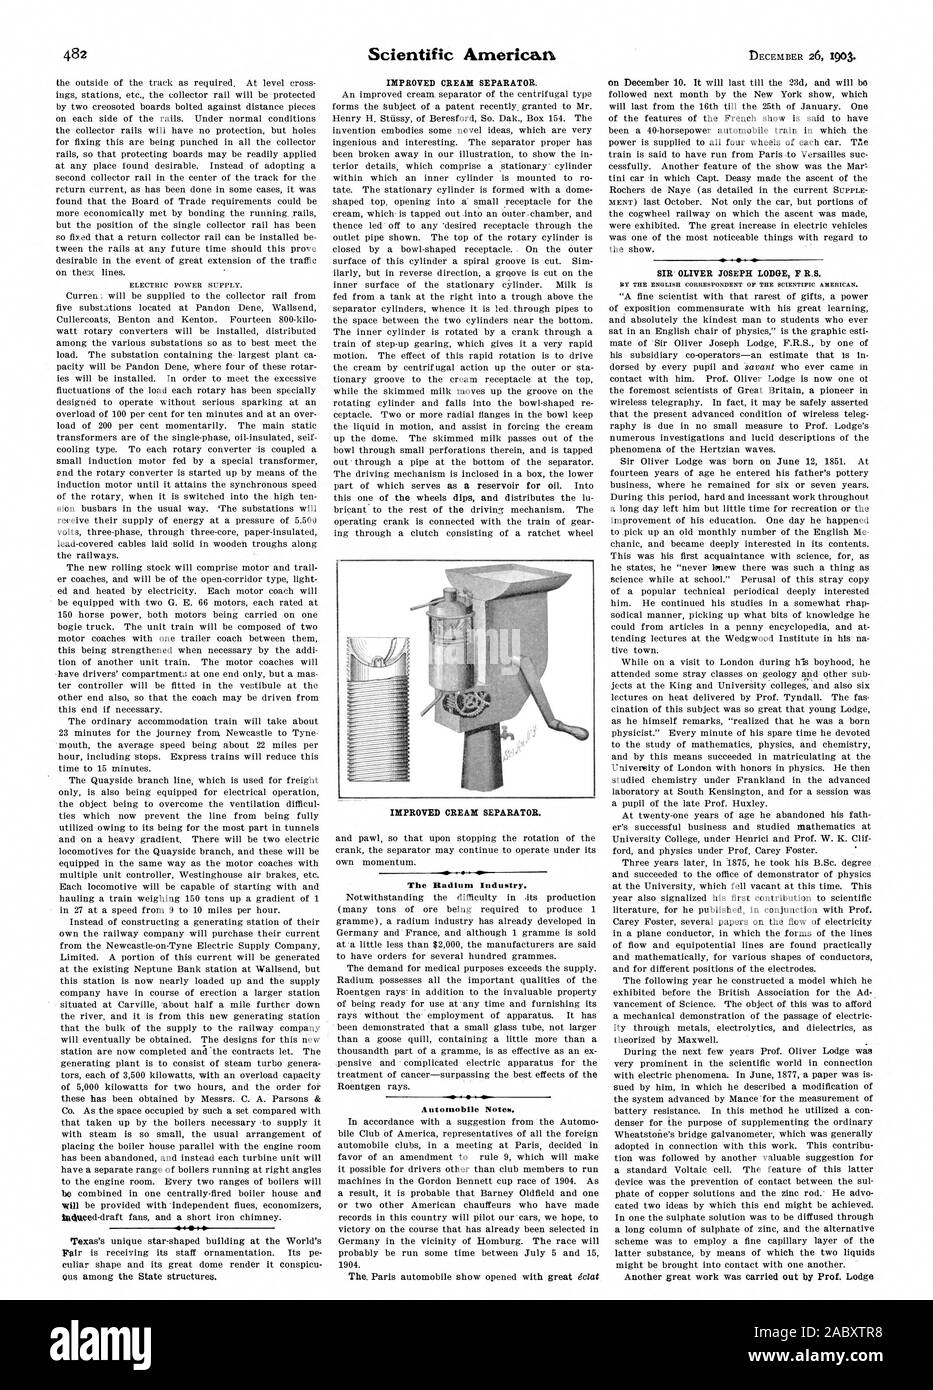 The Radium Industry. Automobile Notes. BY THE ENGLISH CORRESPONDENT OF THE SCIENTIFIC AMERICAN., 1903-12-26 Stock Photo